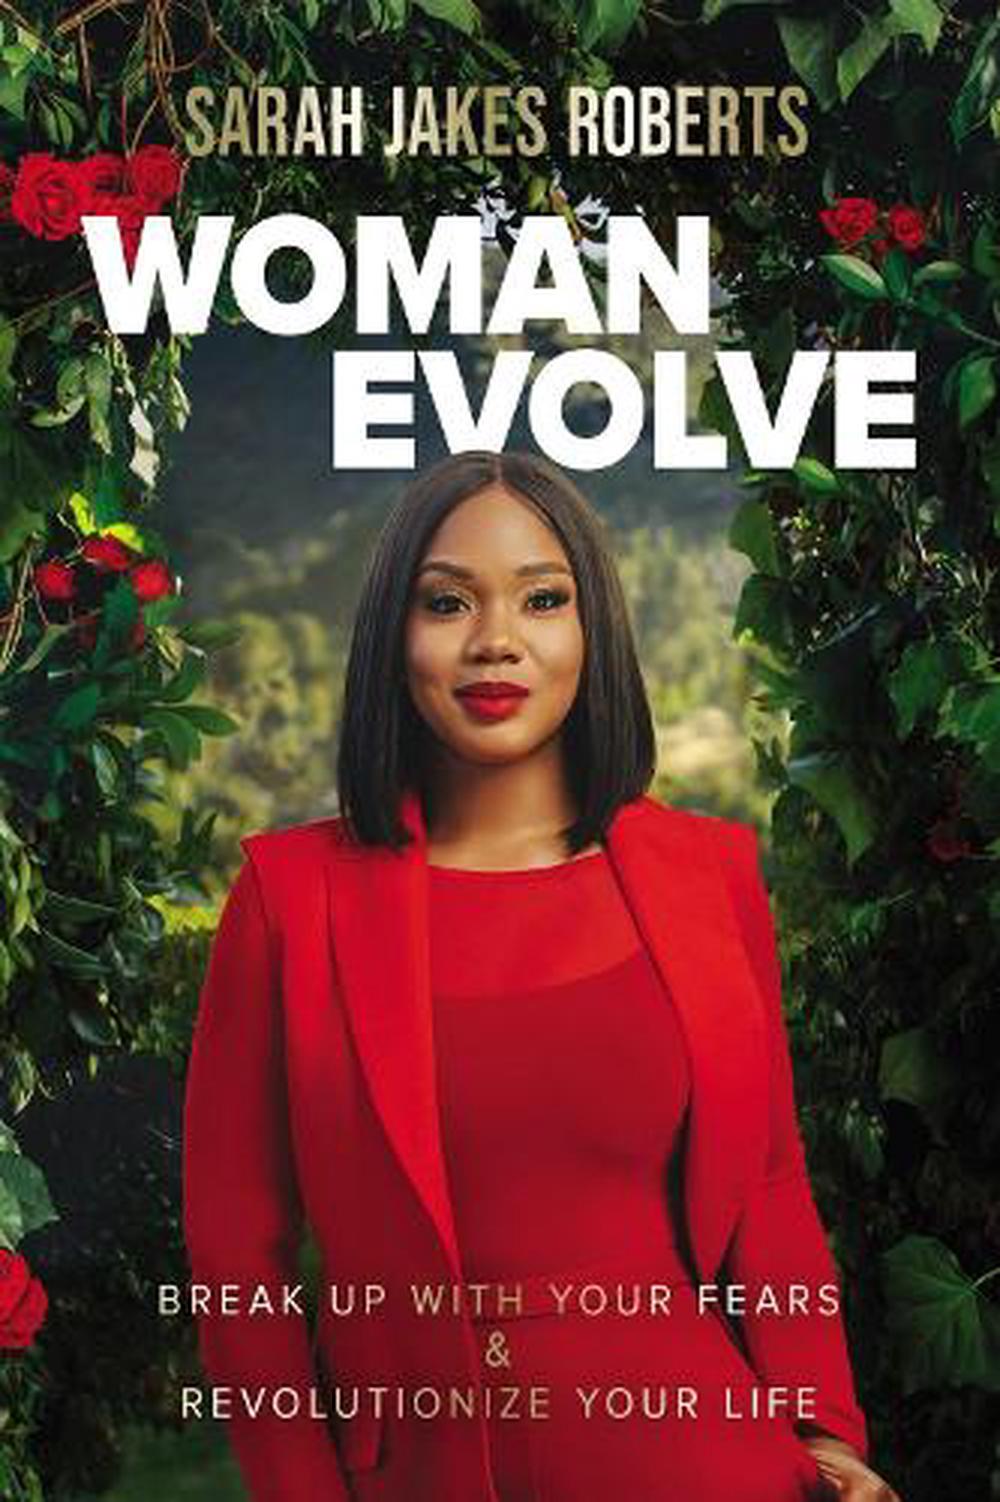 Woman Evolve by Sarah Jakes Roberts, Hardcover, 9780785235545 Buy